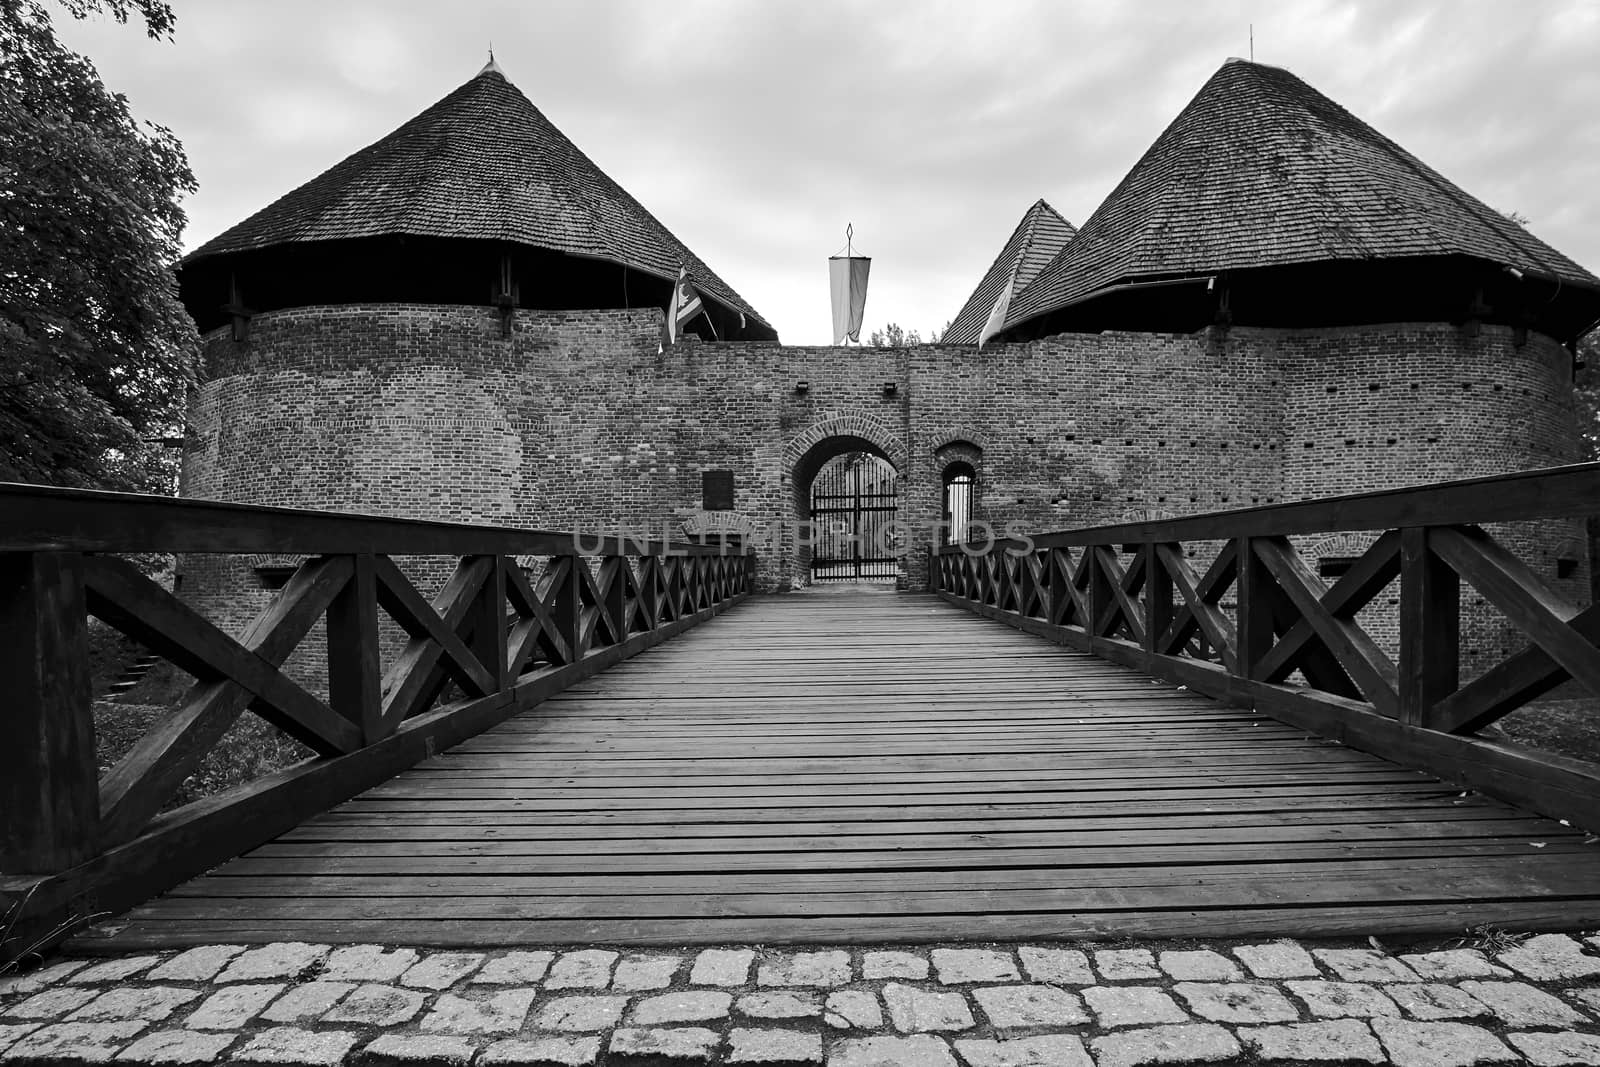 Bridge over the moat and a medieval fortified castle in Miedzyrzec by gkordus